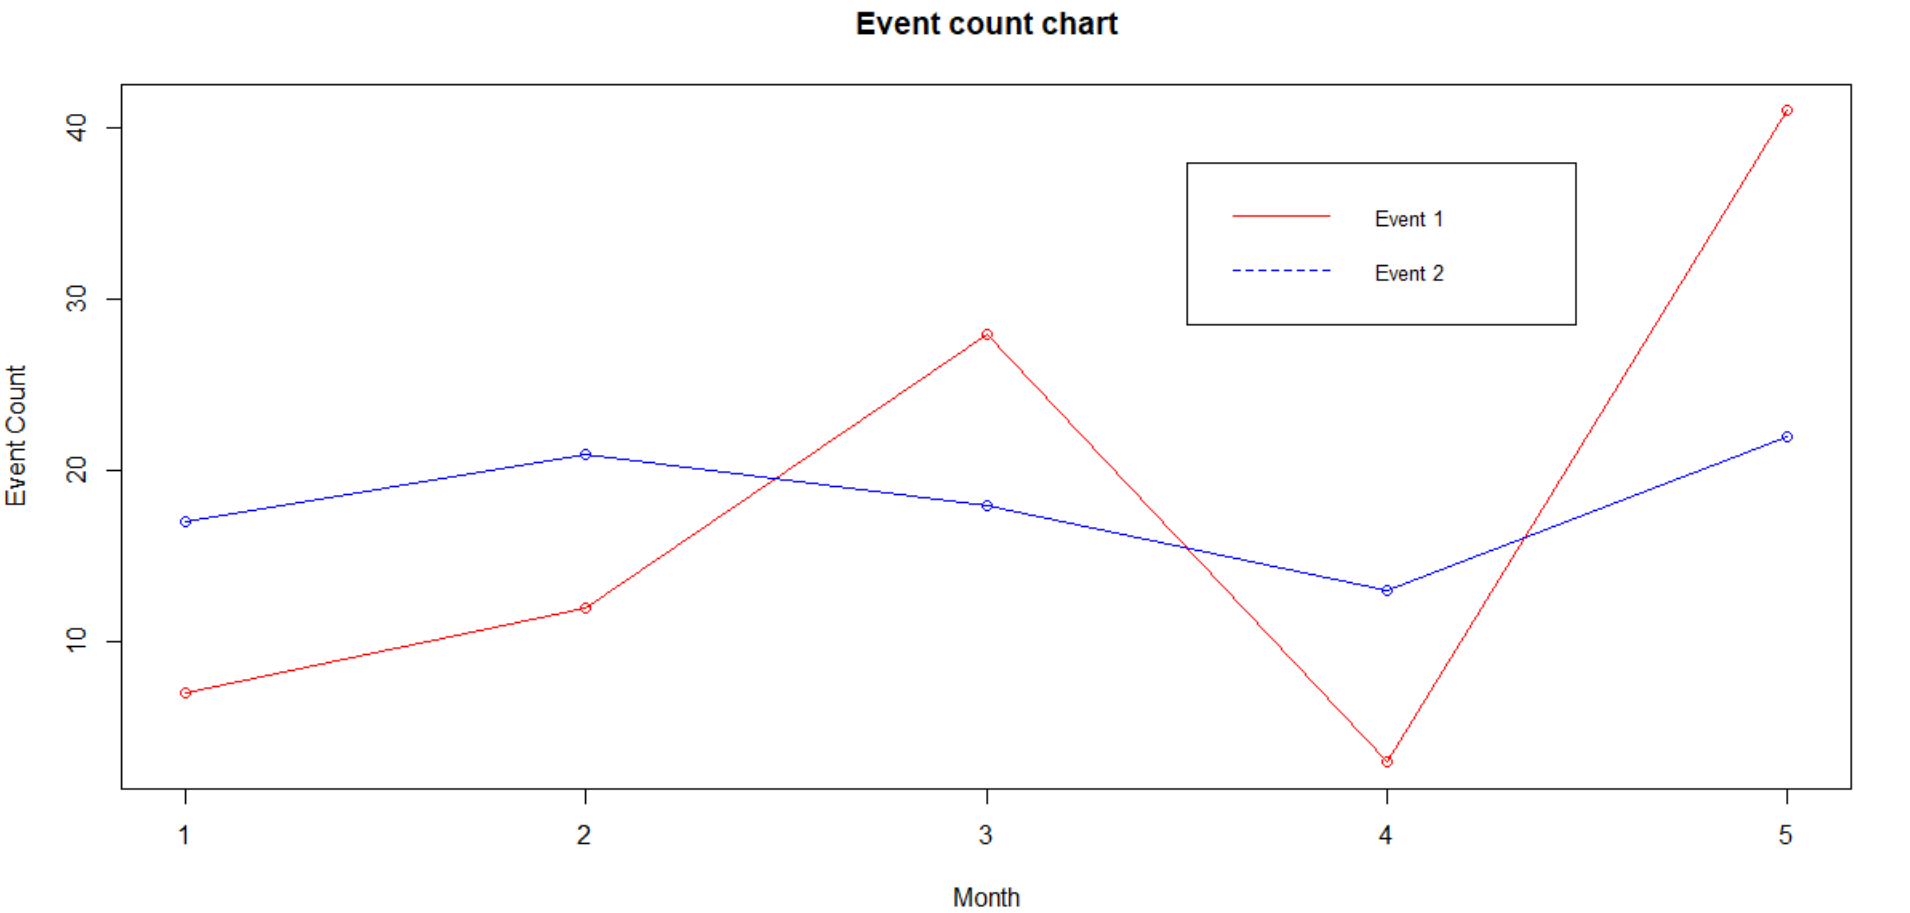 Event count chart